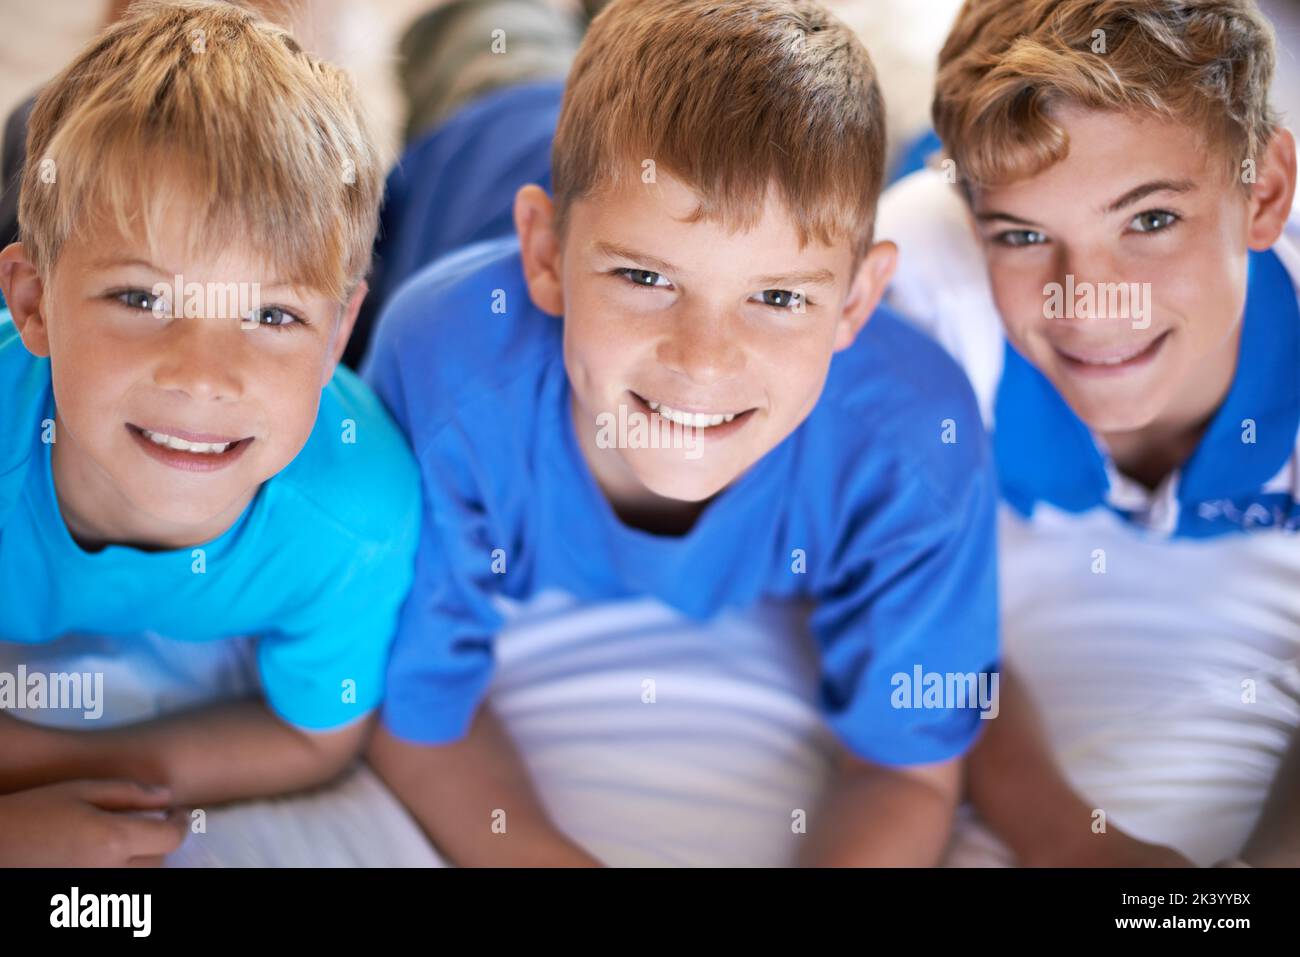 Theyre so alike. Three brothers smiling at the camera happily. Stock Photo